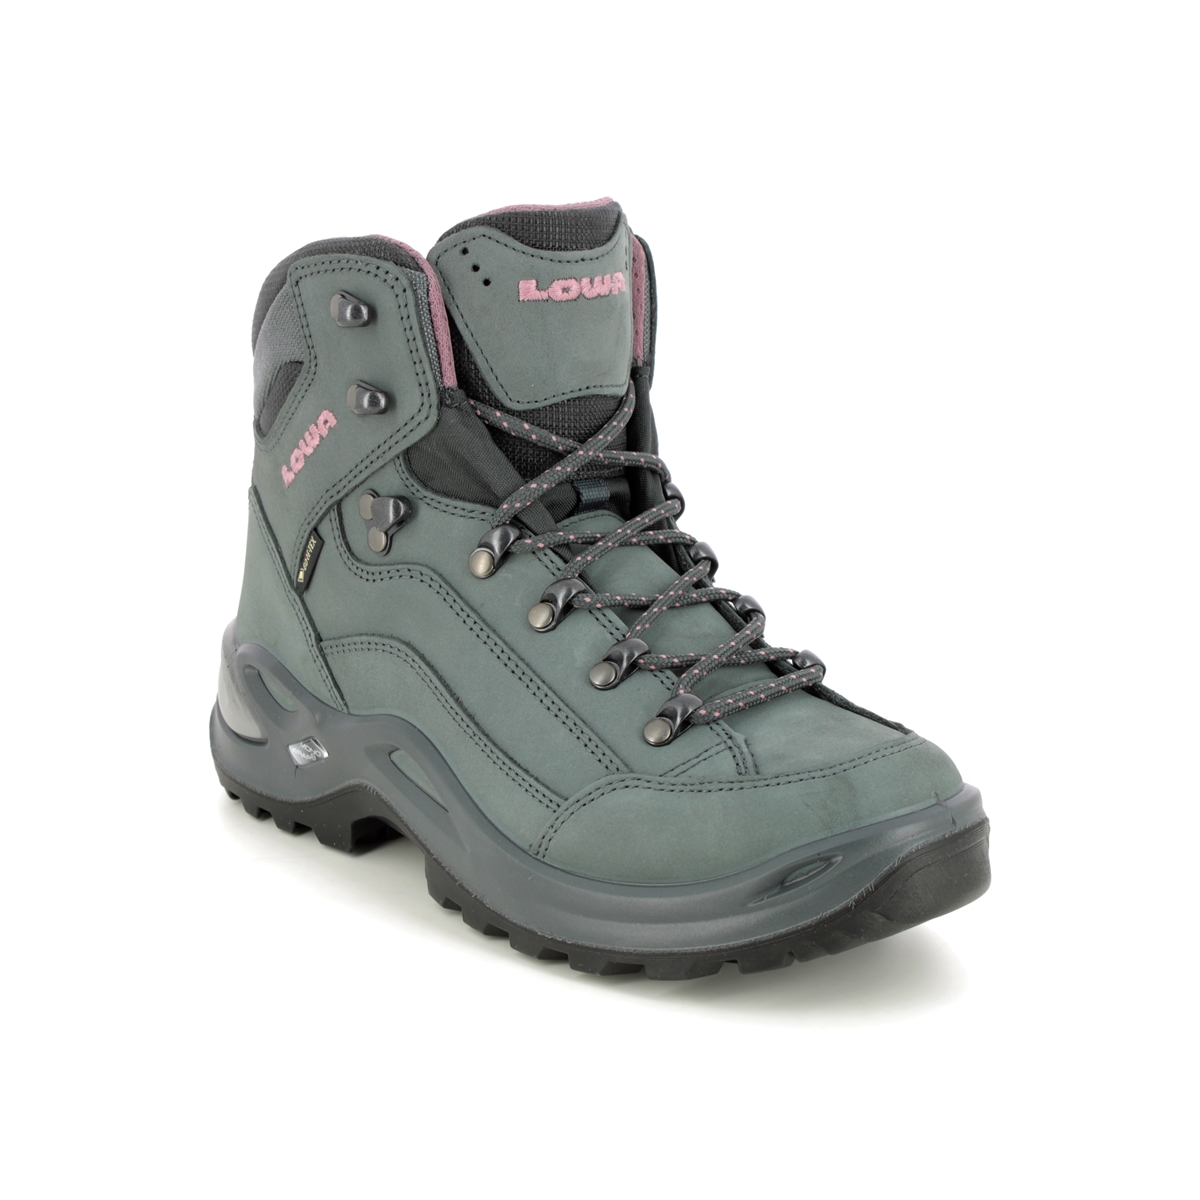 Lowa Renegade Gtx W Womens Walking Boots In Charcoal 320945-9789 In Regular Fit Ladies Uk Size 4.5 In Plain Charcoal